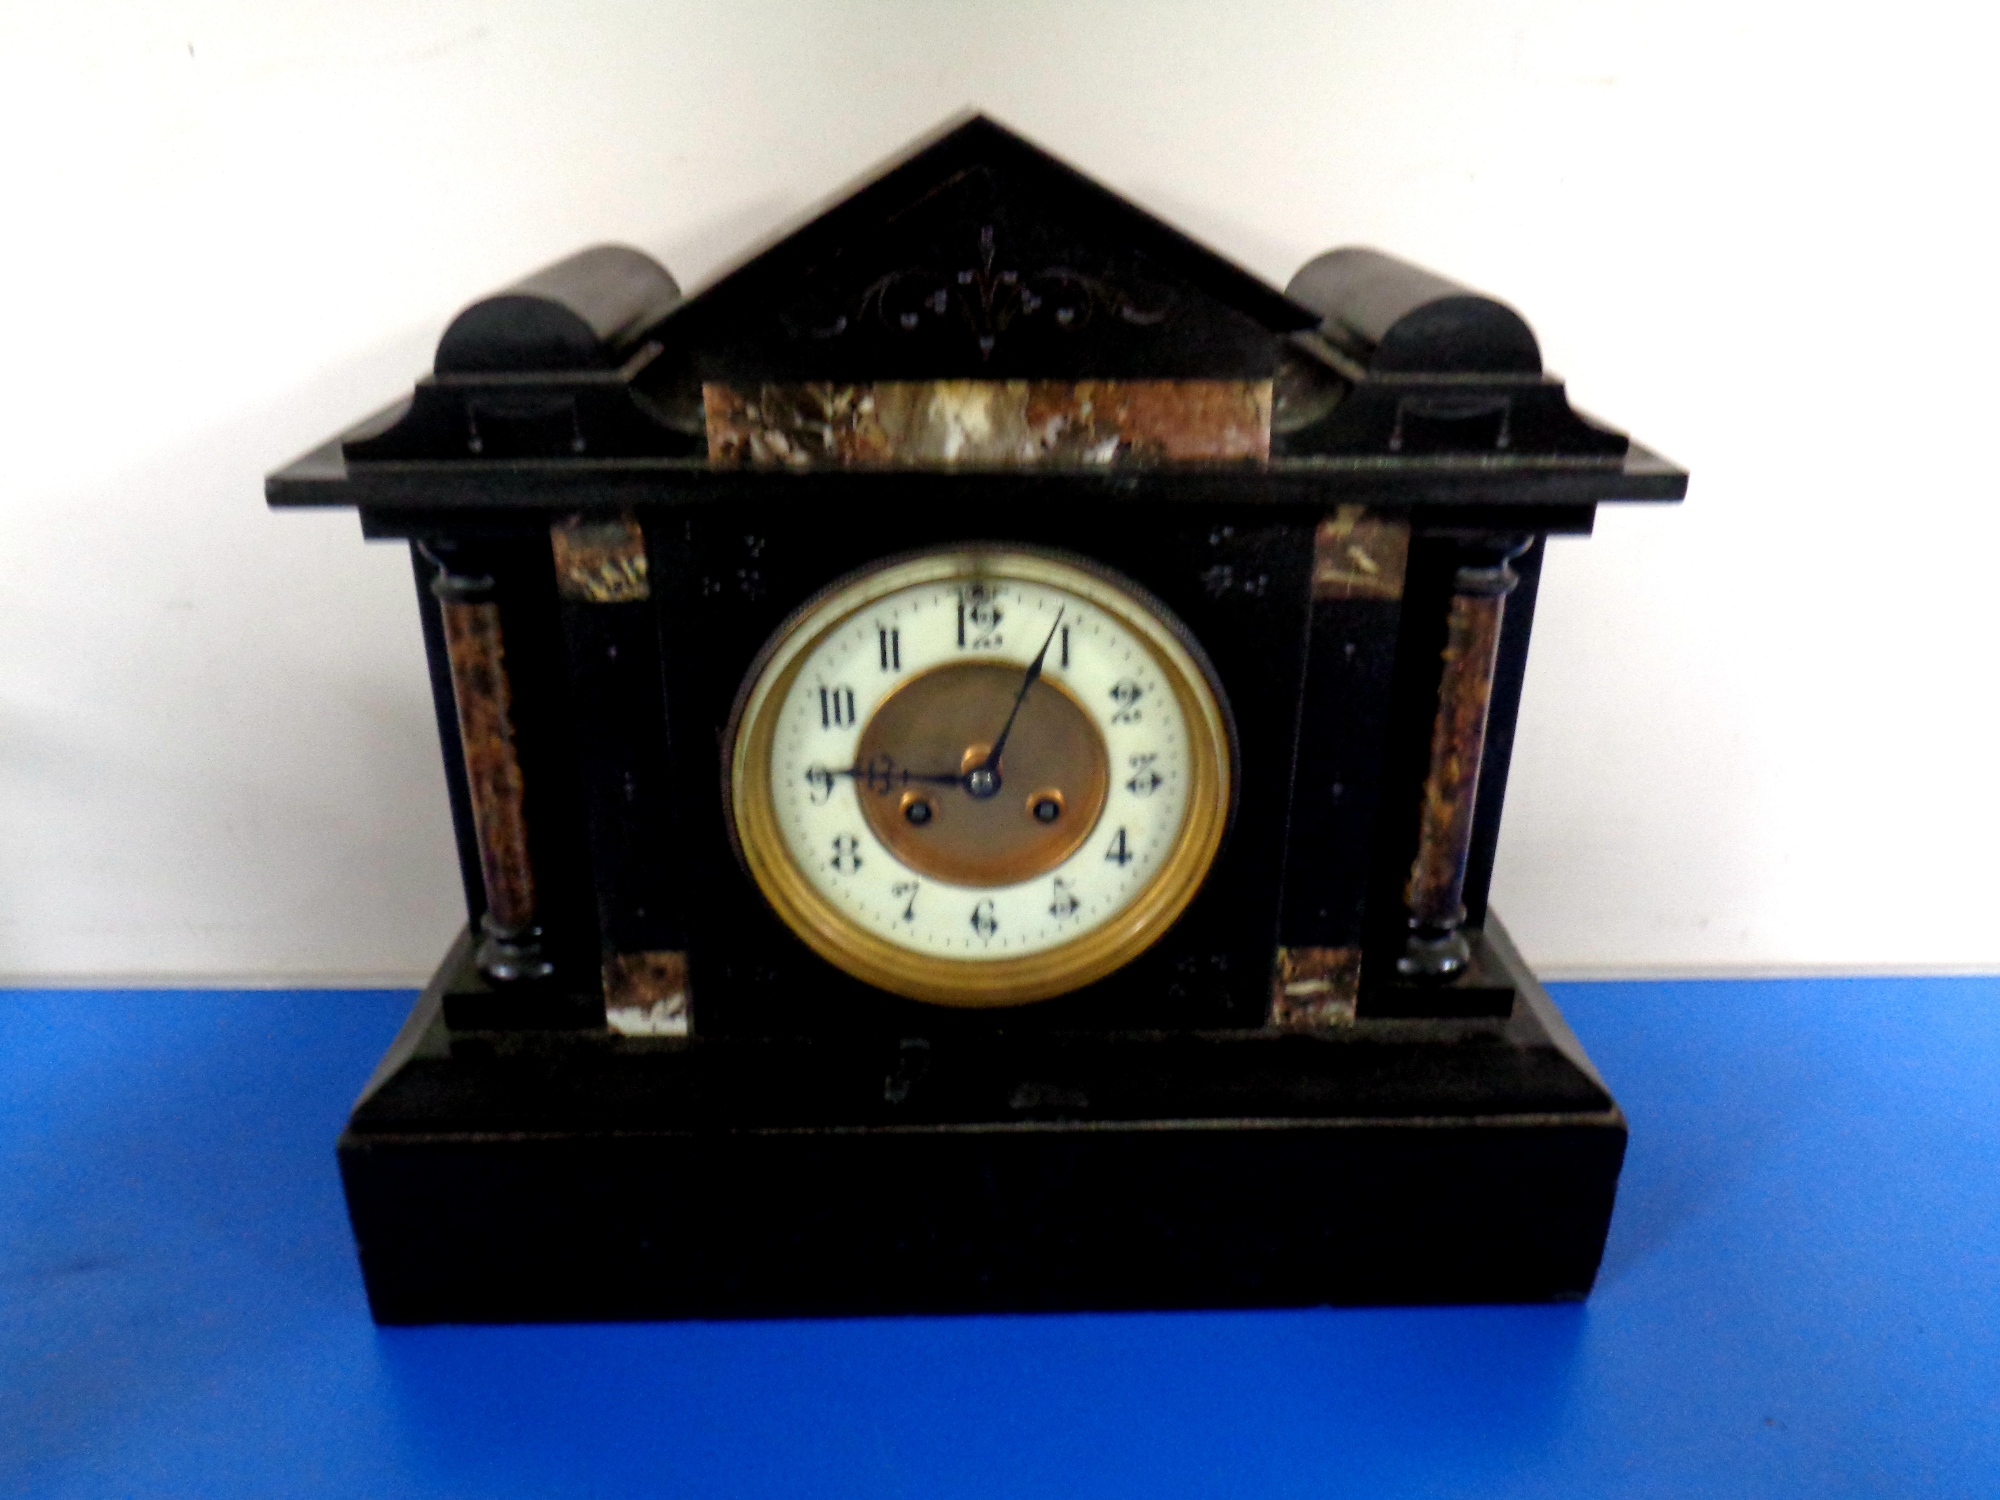 An antique black slate and marble mantel clock